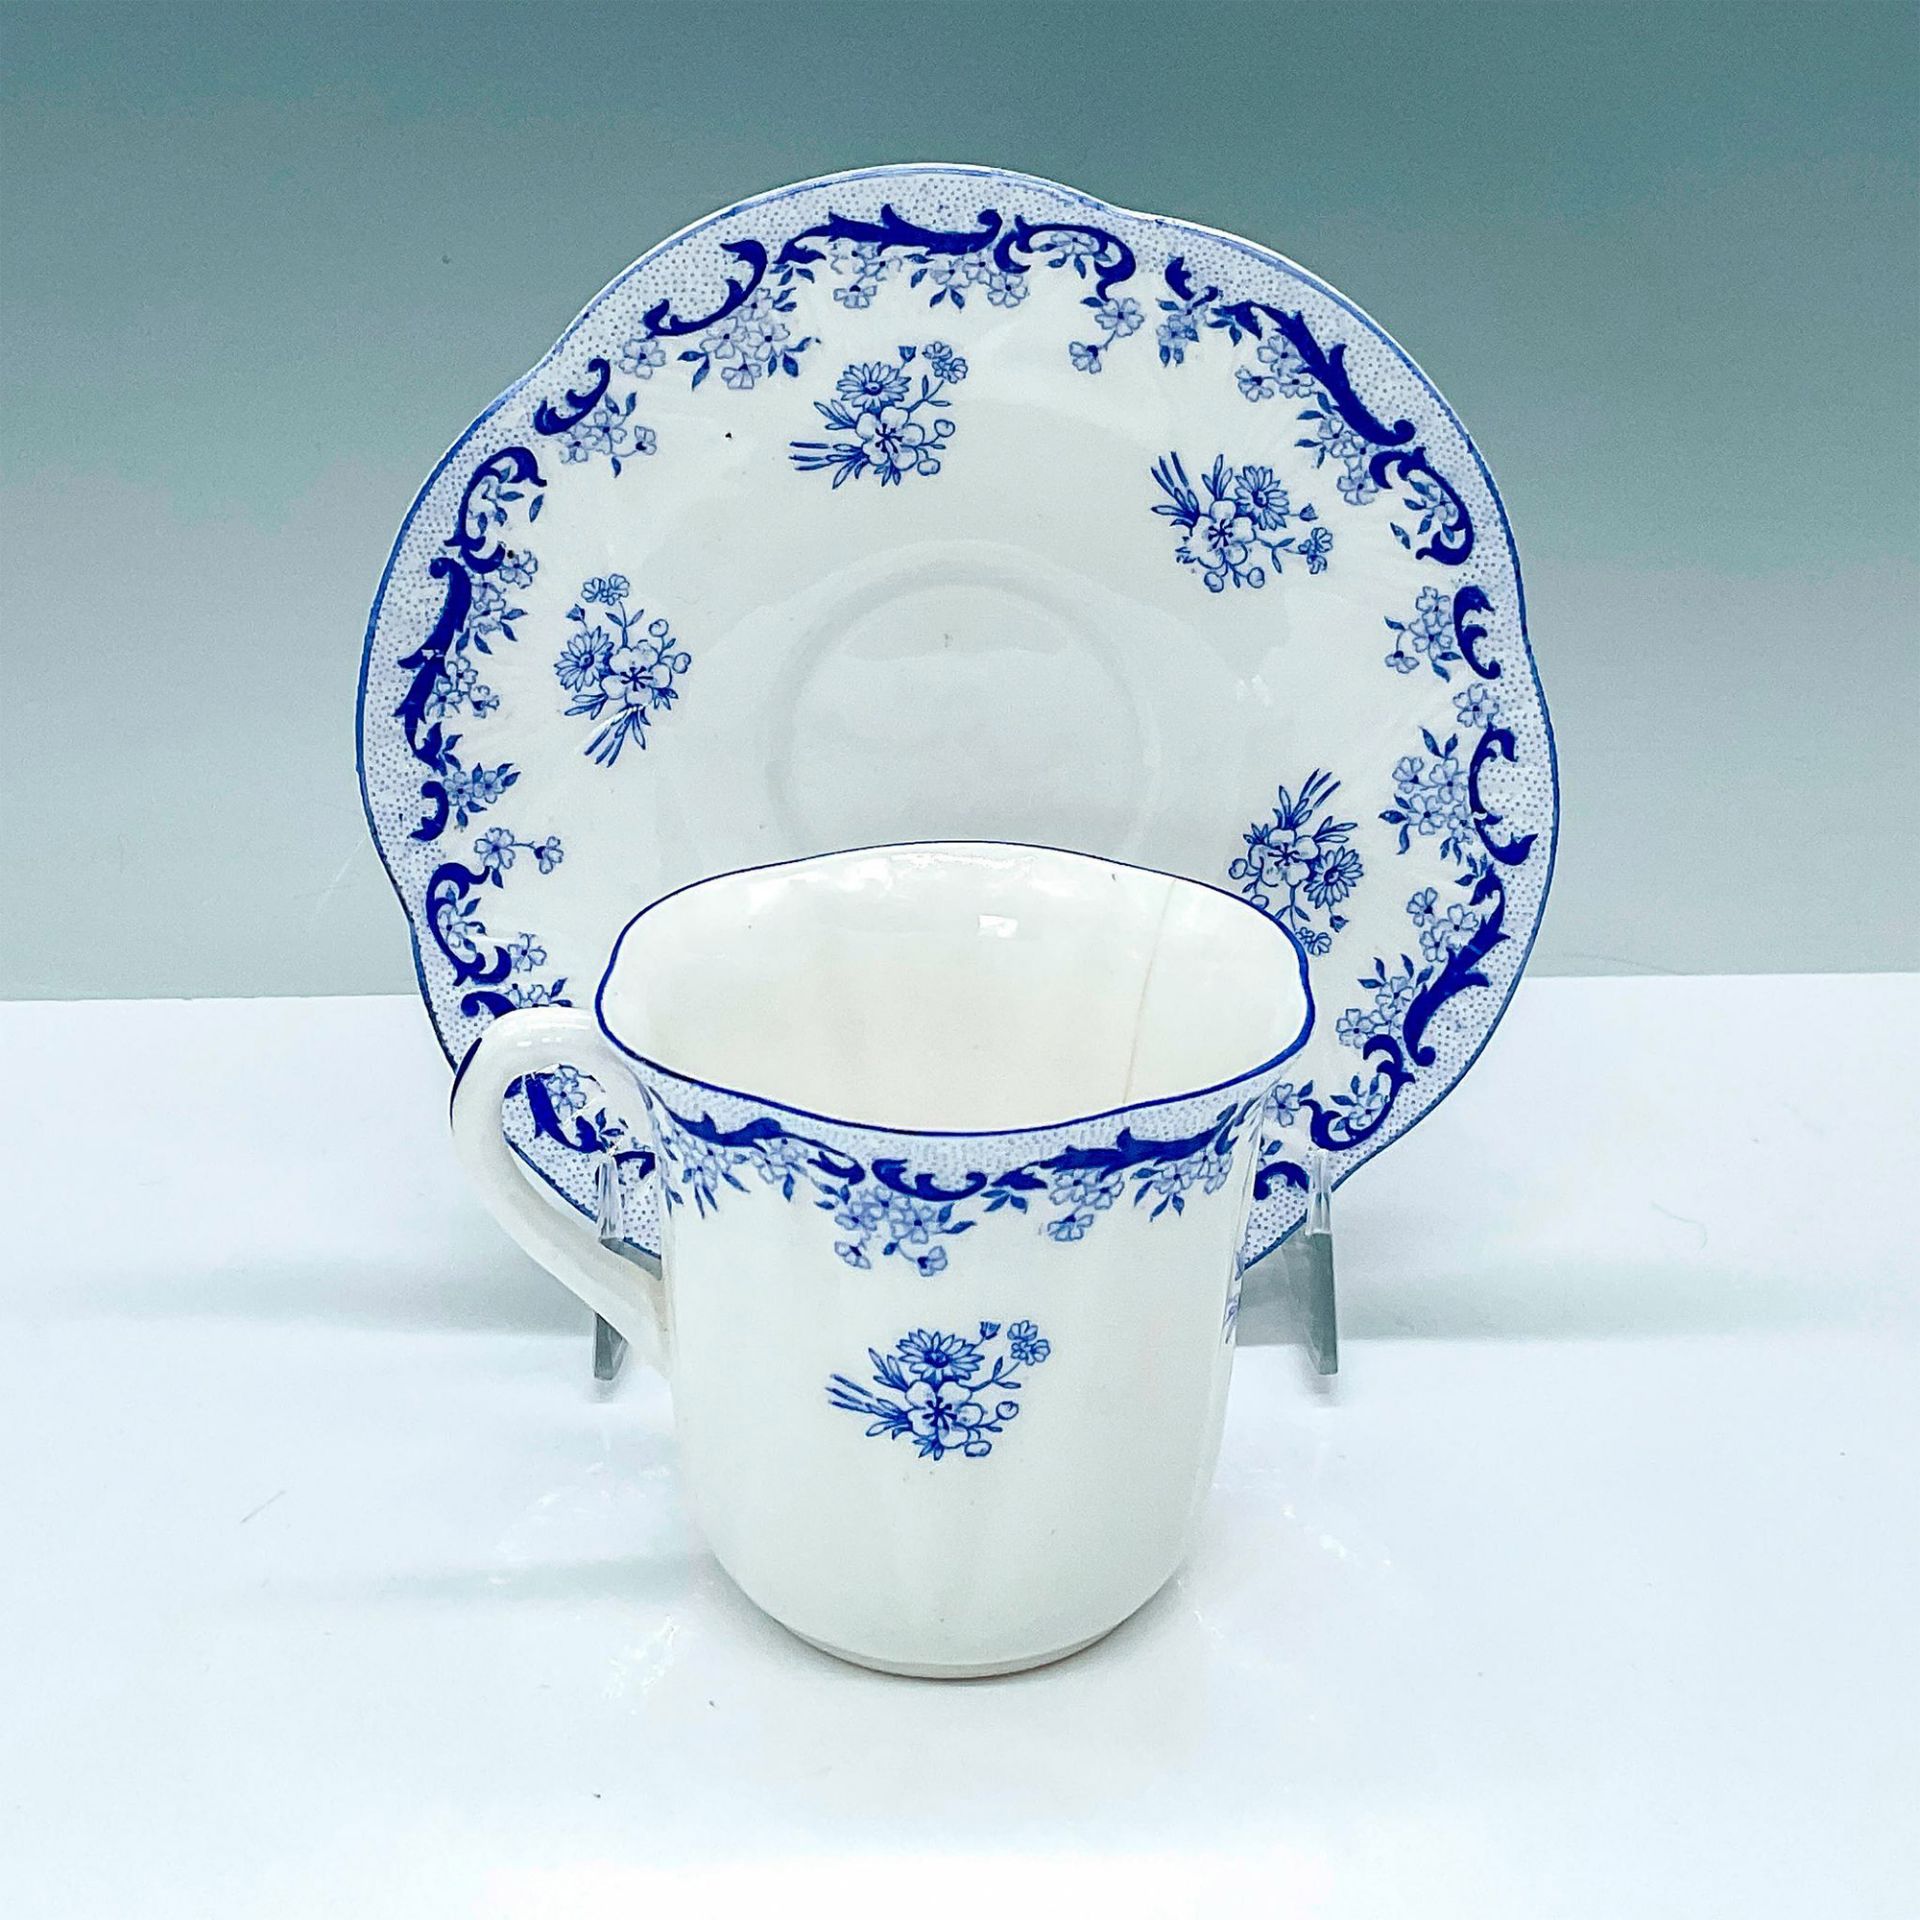 Shelley China Teacup and Saucer Set, Heavenly Blue 14075 - Image 2 of 3